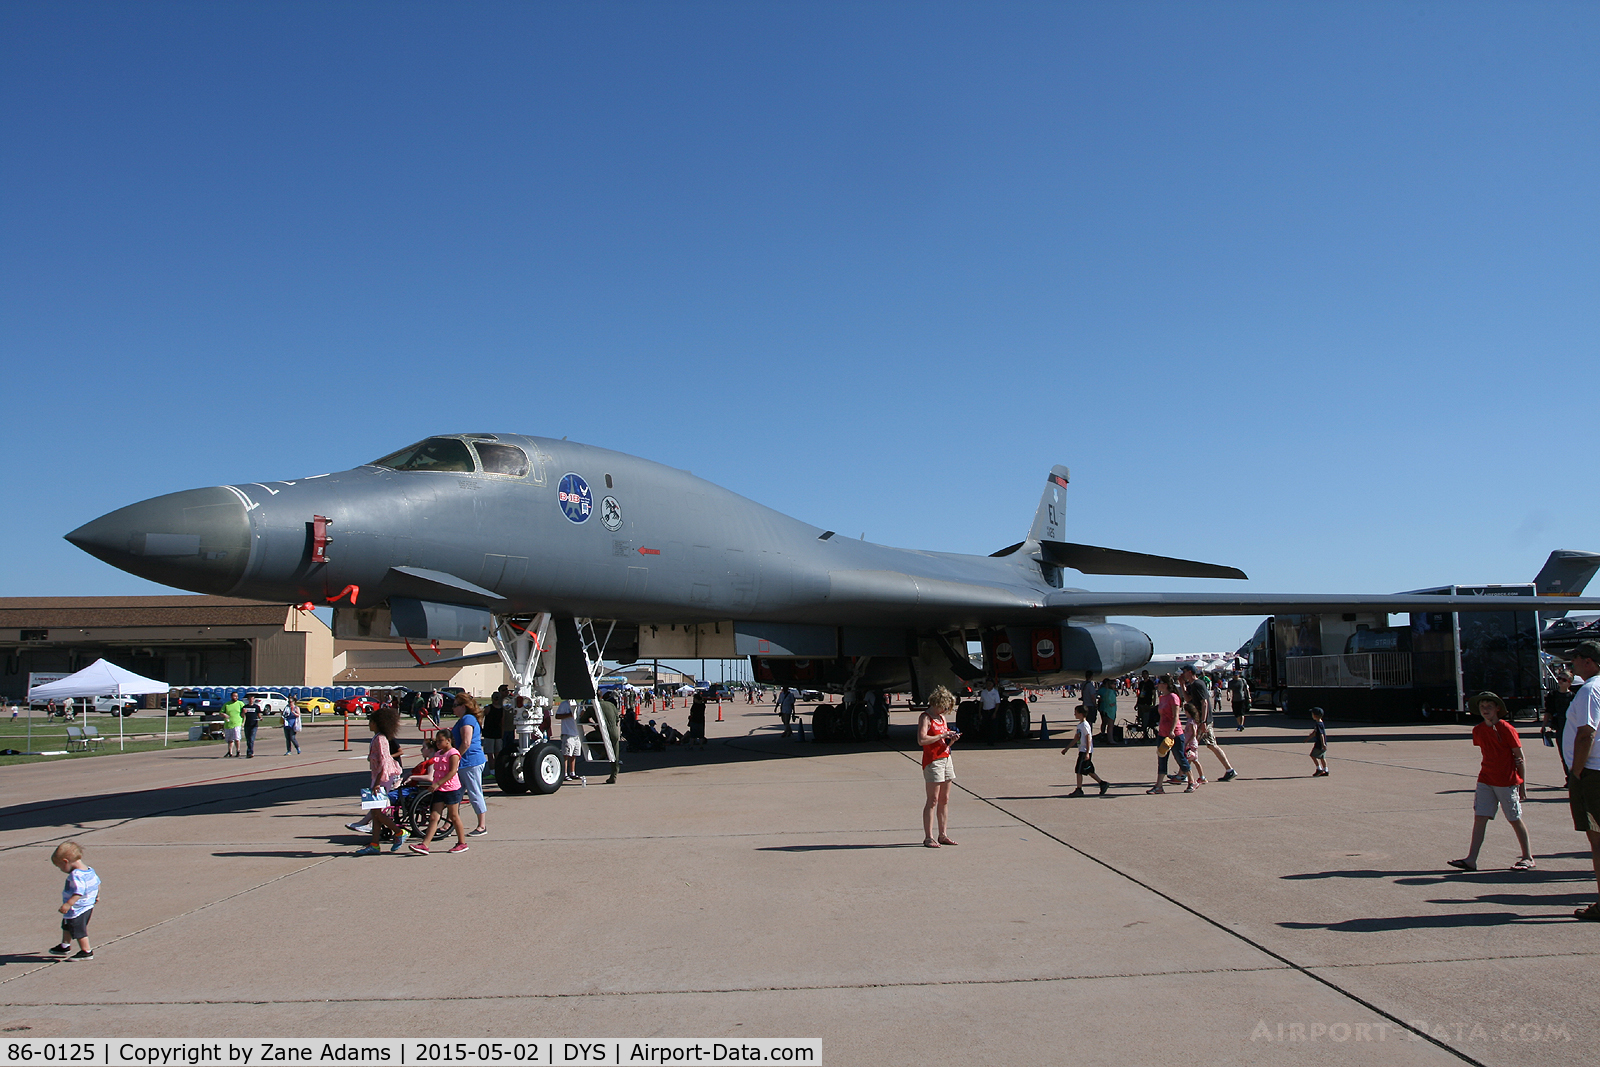 86-0125, 1986 Rockwell B-1B Lancer C/N 85, At the 2015 Big Country Airshow - Dyess AFB, TX